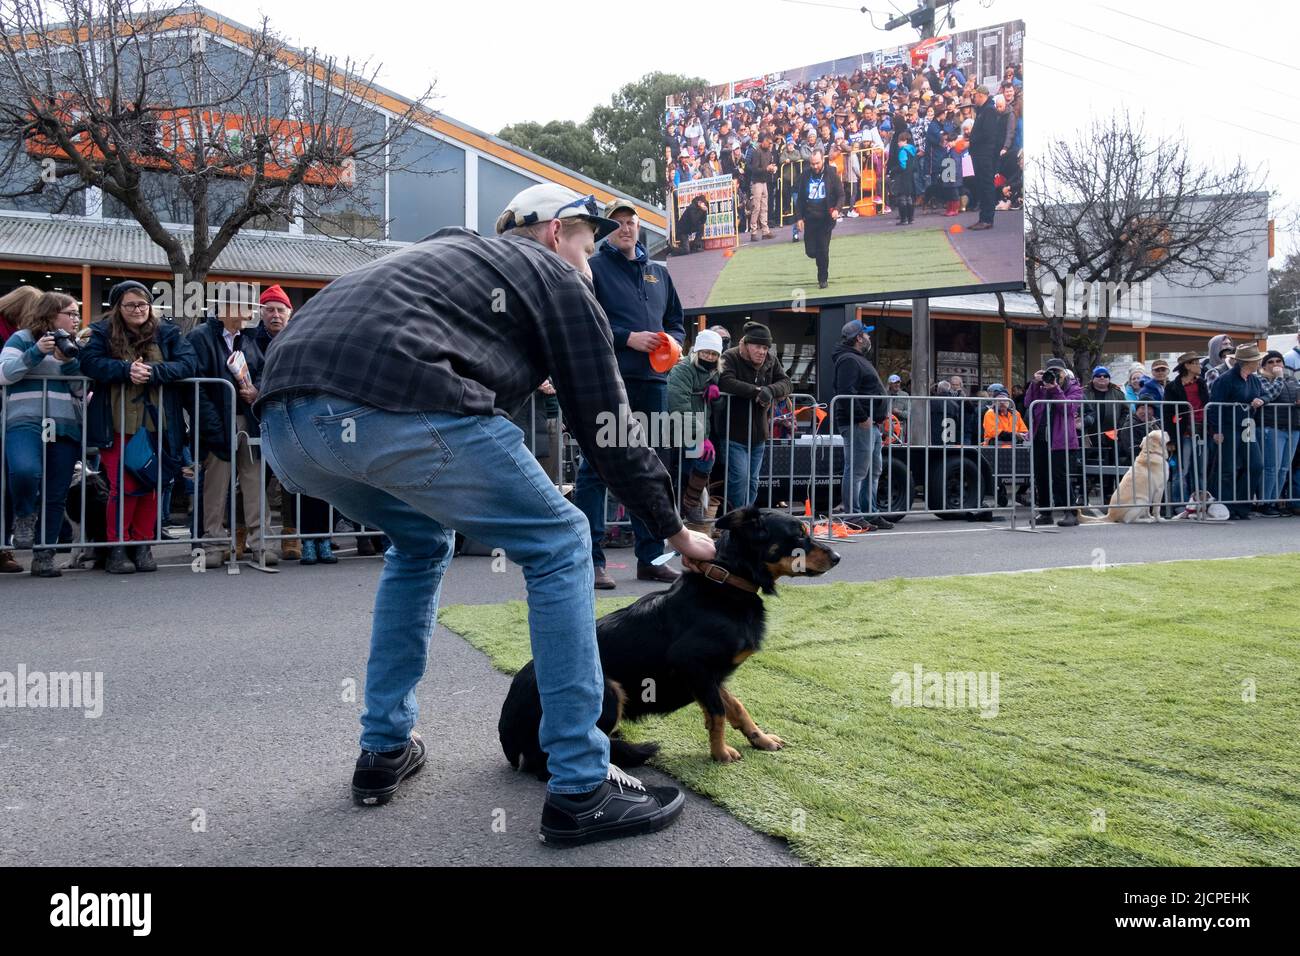 A Kelpie dog waits with it's owner for the start of the dog races at the Kelpie Muster in Casterton, Victoria, Australia Stock Photo